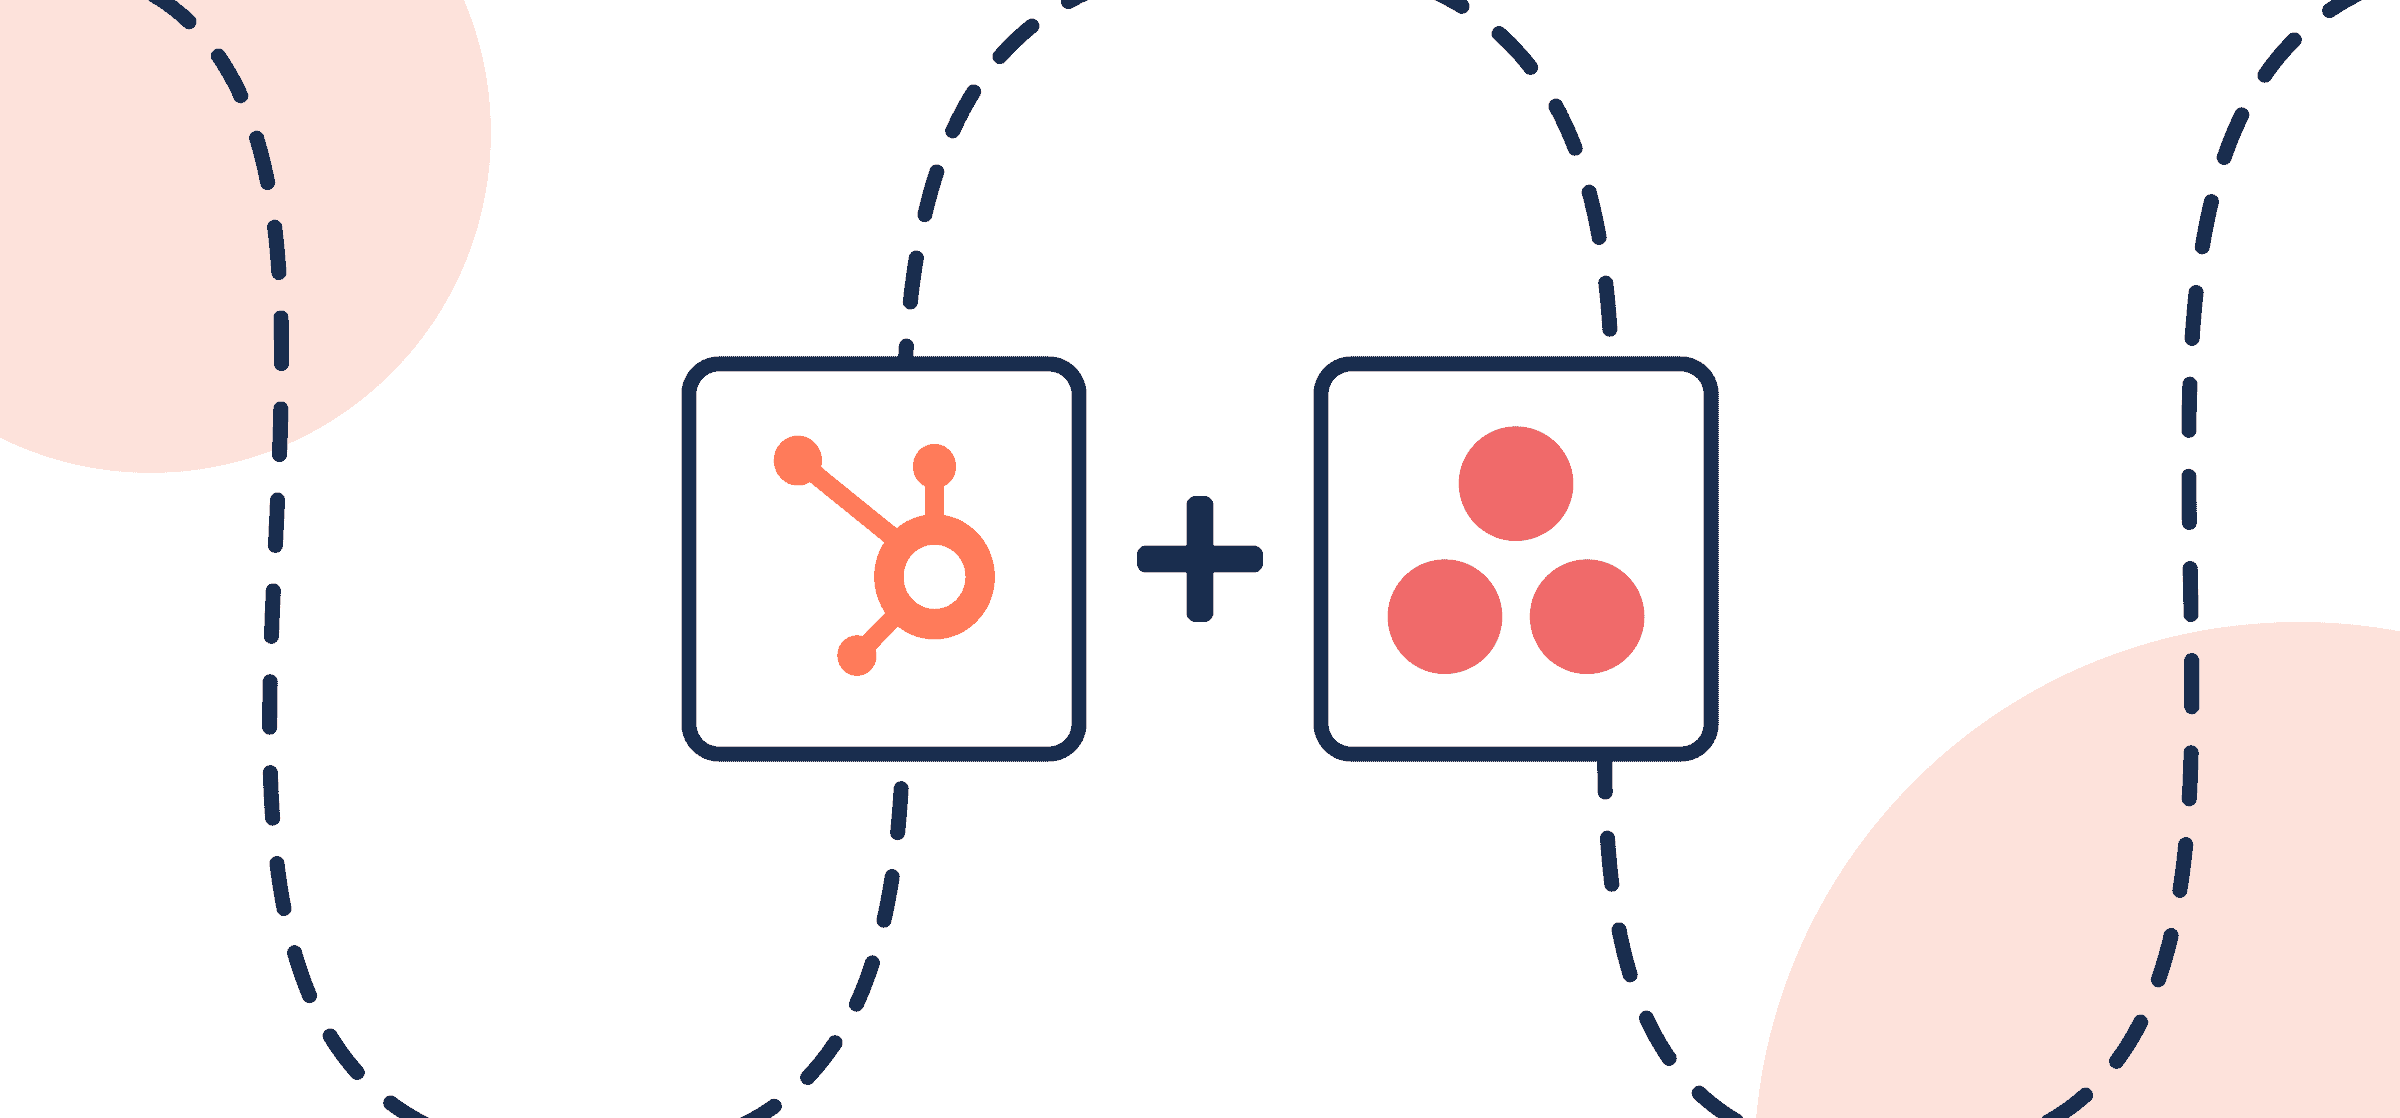 Featured image displaying the logos of HubSpot and Asana in Unito's guide to setting up a simple Two-Way Sync